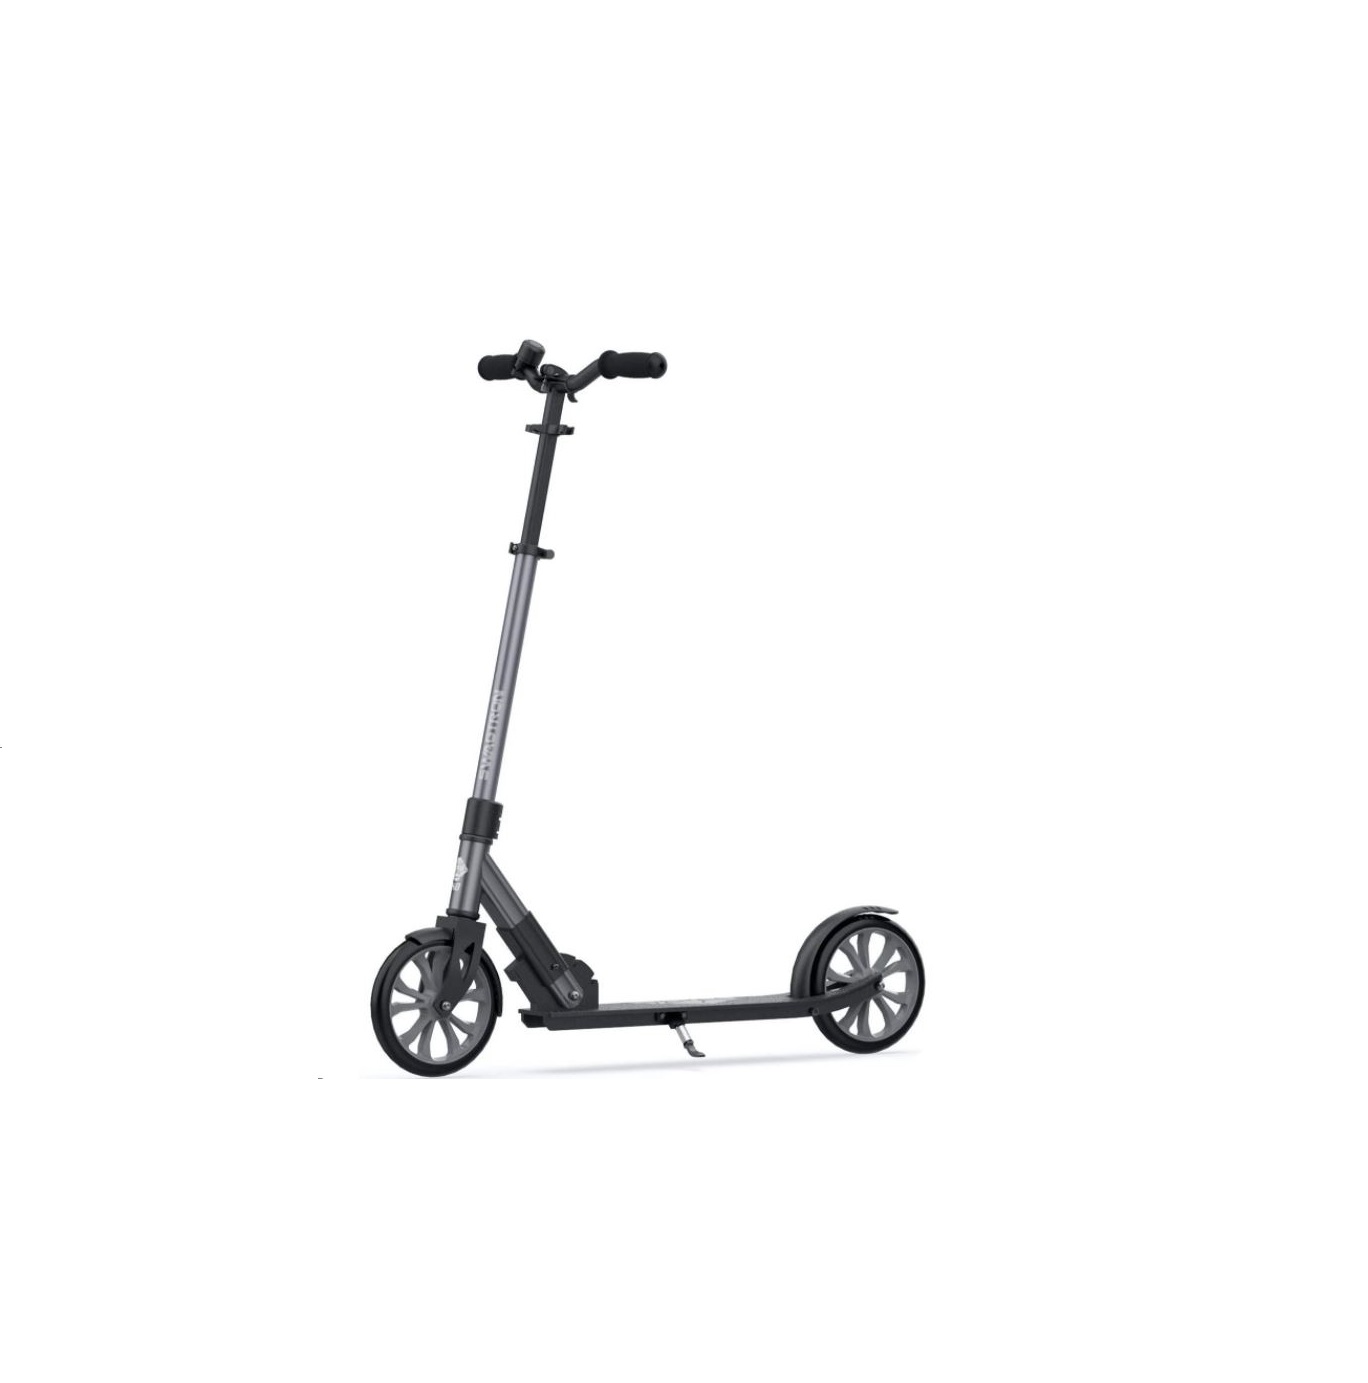 RENEGADE Lightweight and Foldable Kick Scooter User Manual